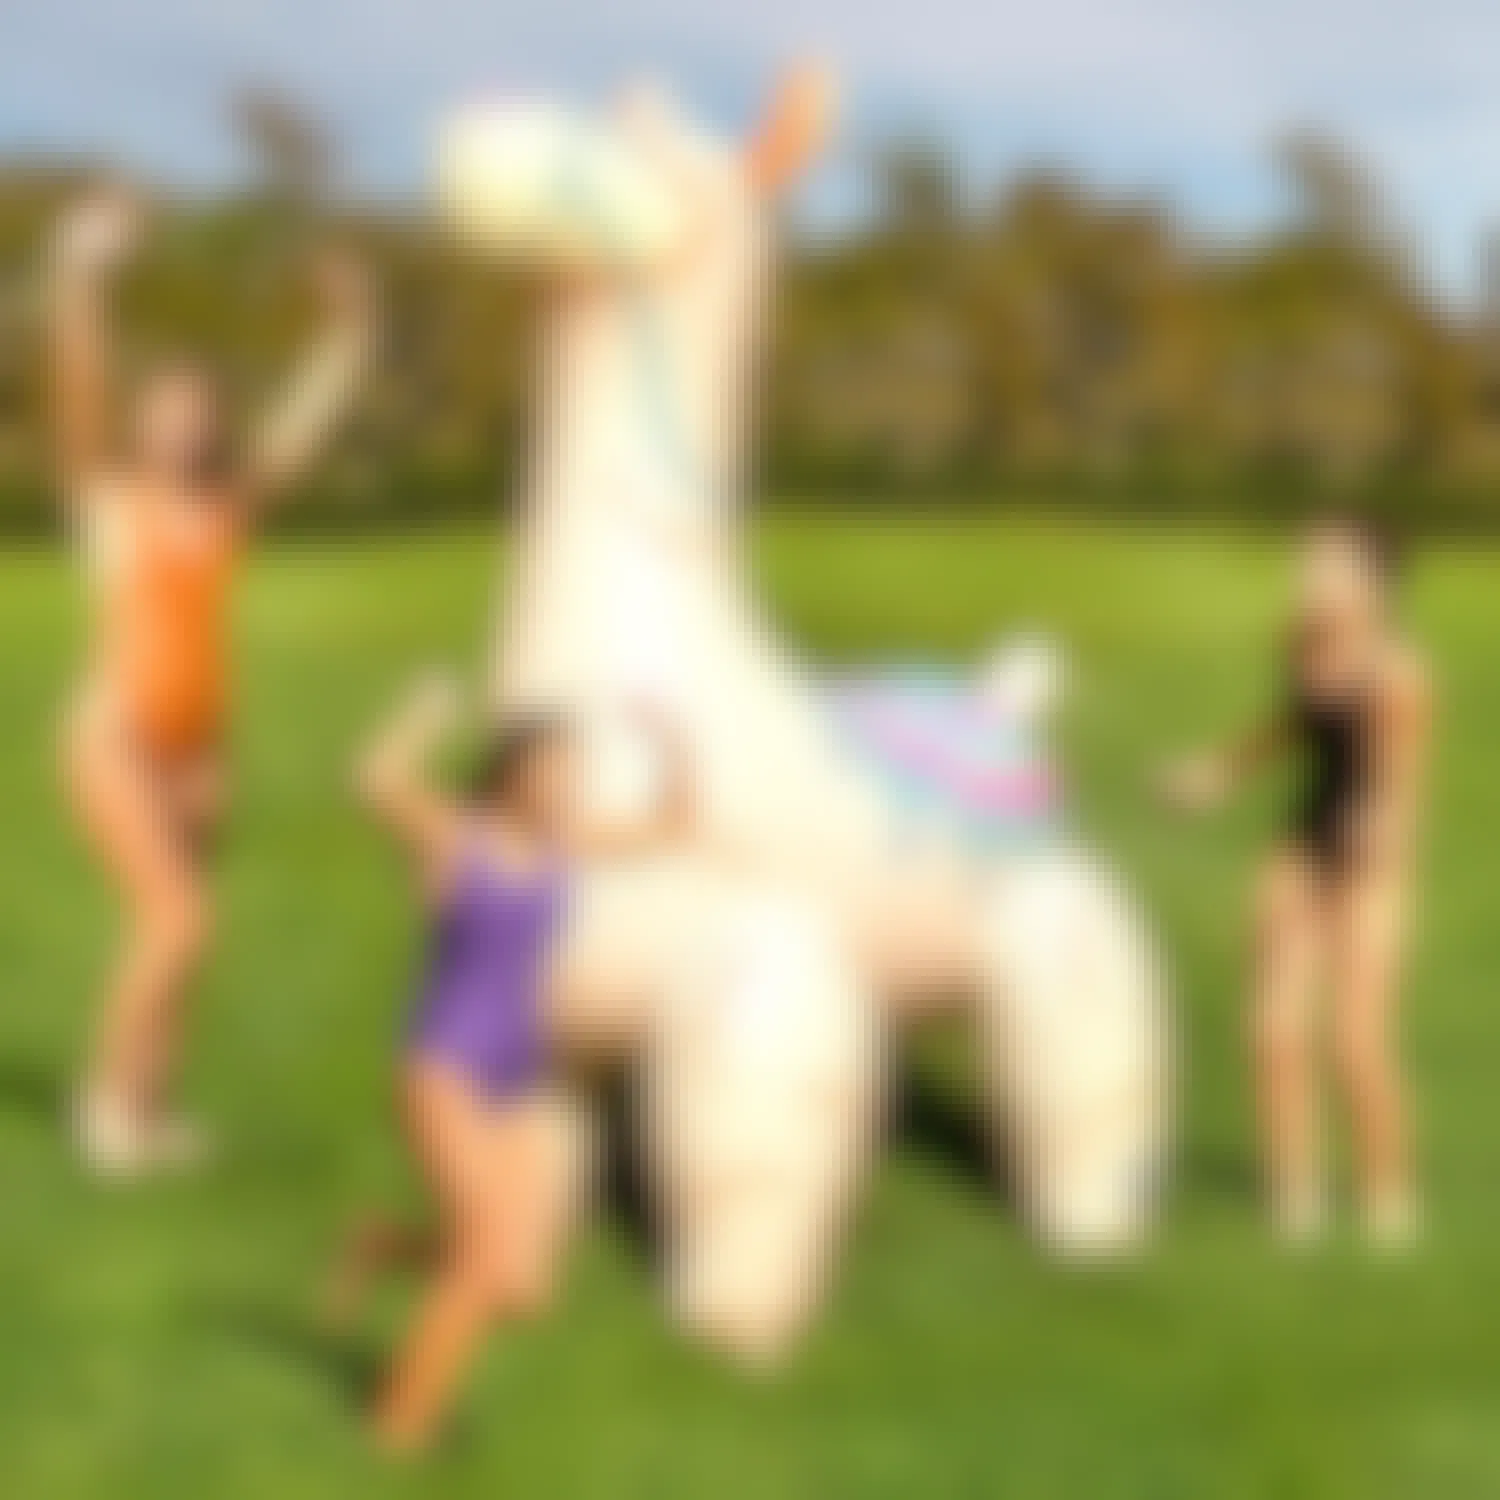 3 people playing around a giant inflatable llama sprinkler